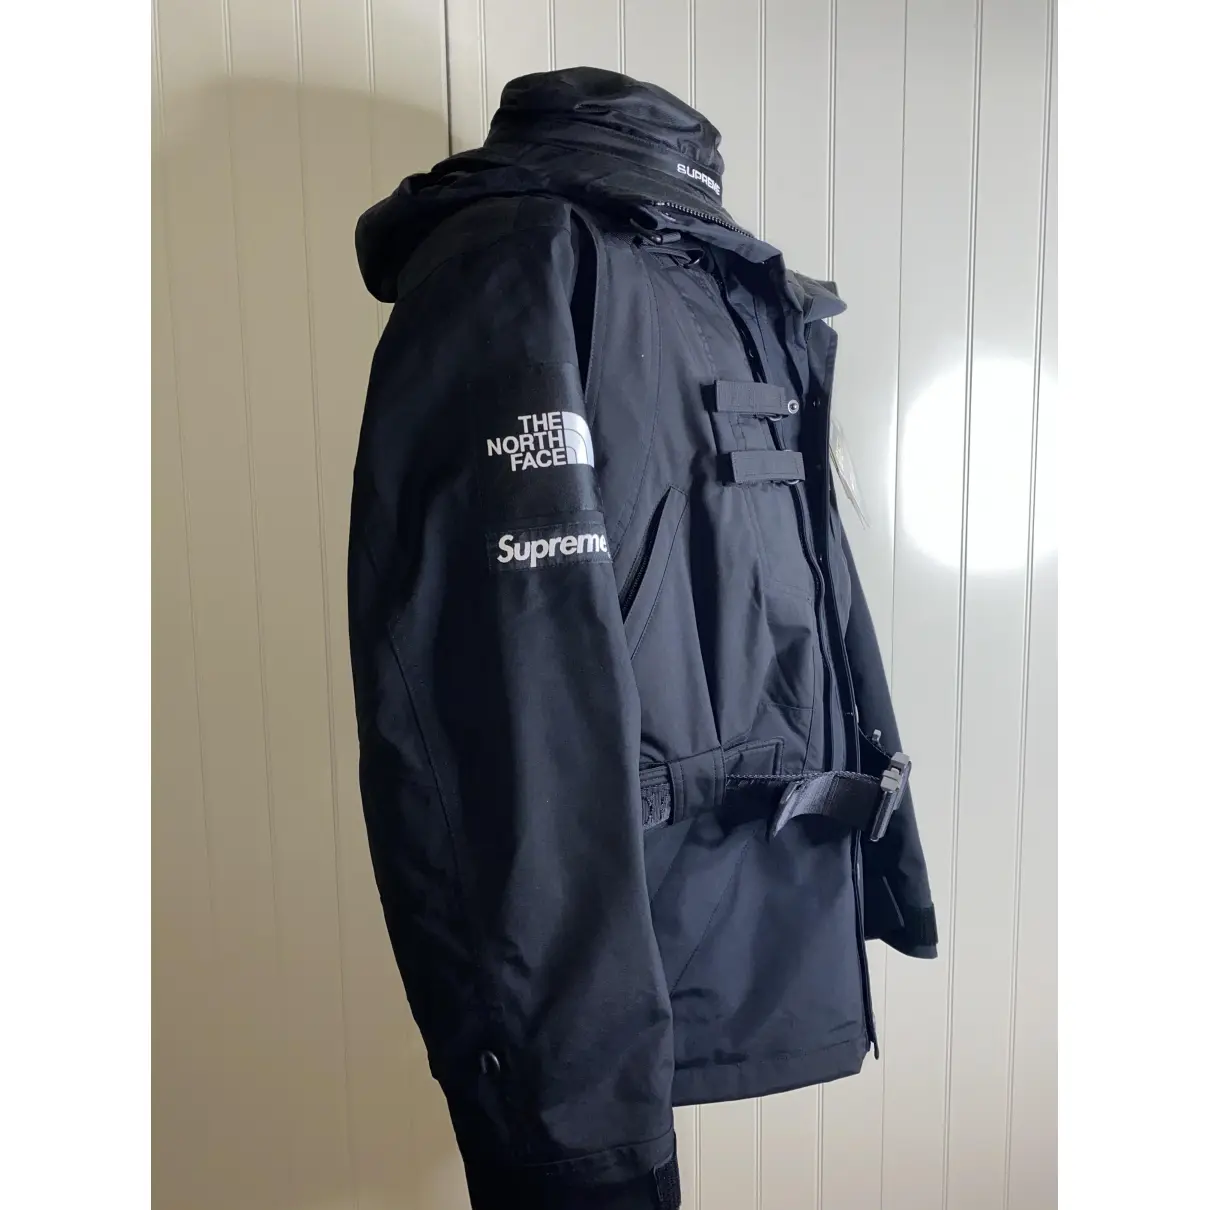 Jacket Supreme x The North Face Black size L International in